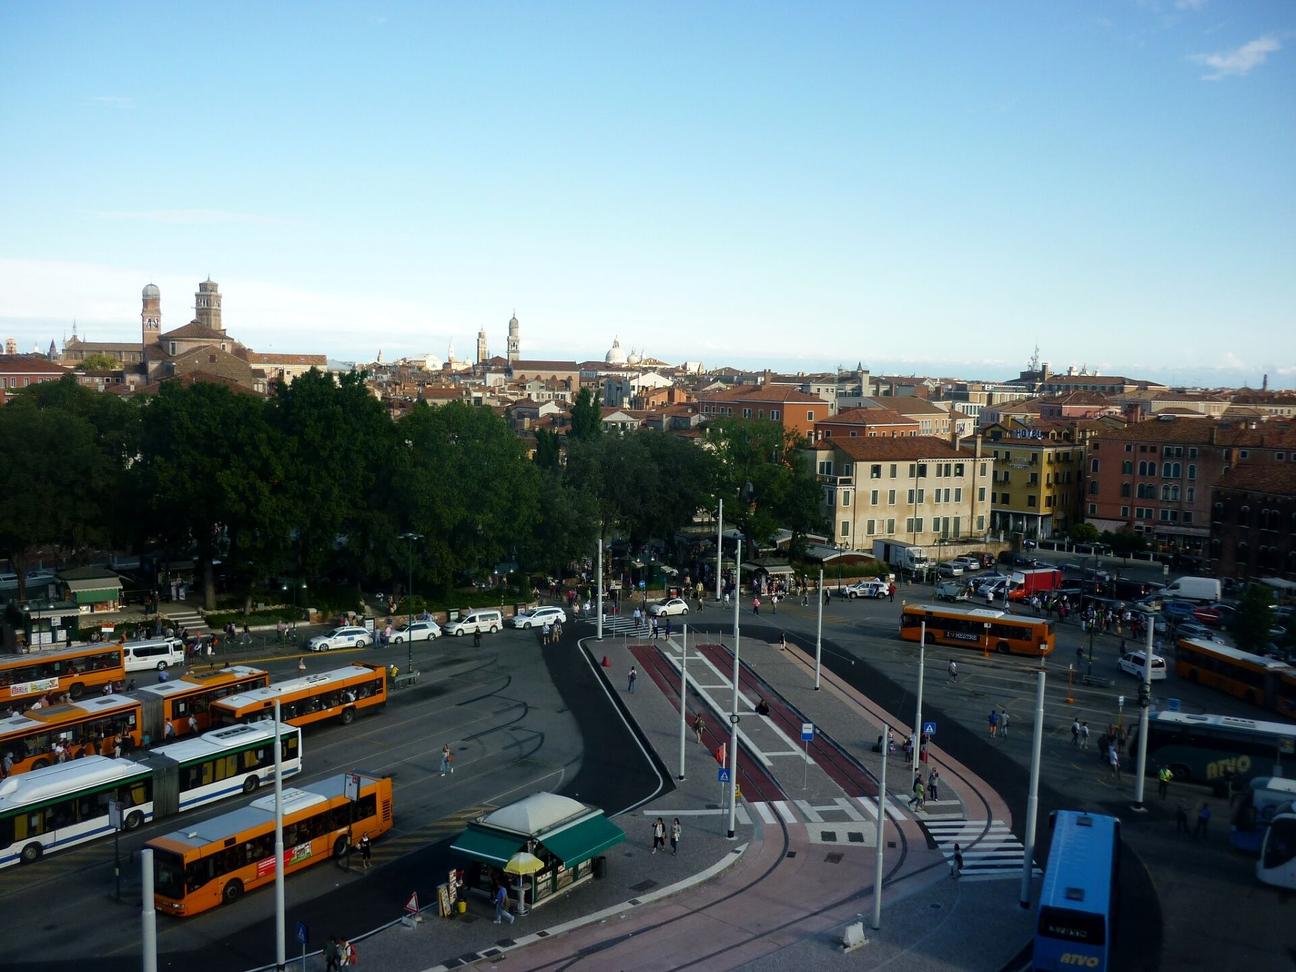 A photo of Piazzale Roma